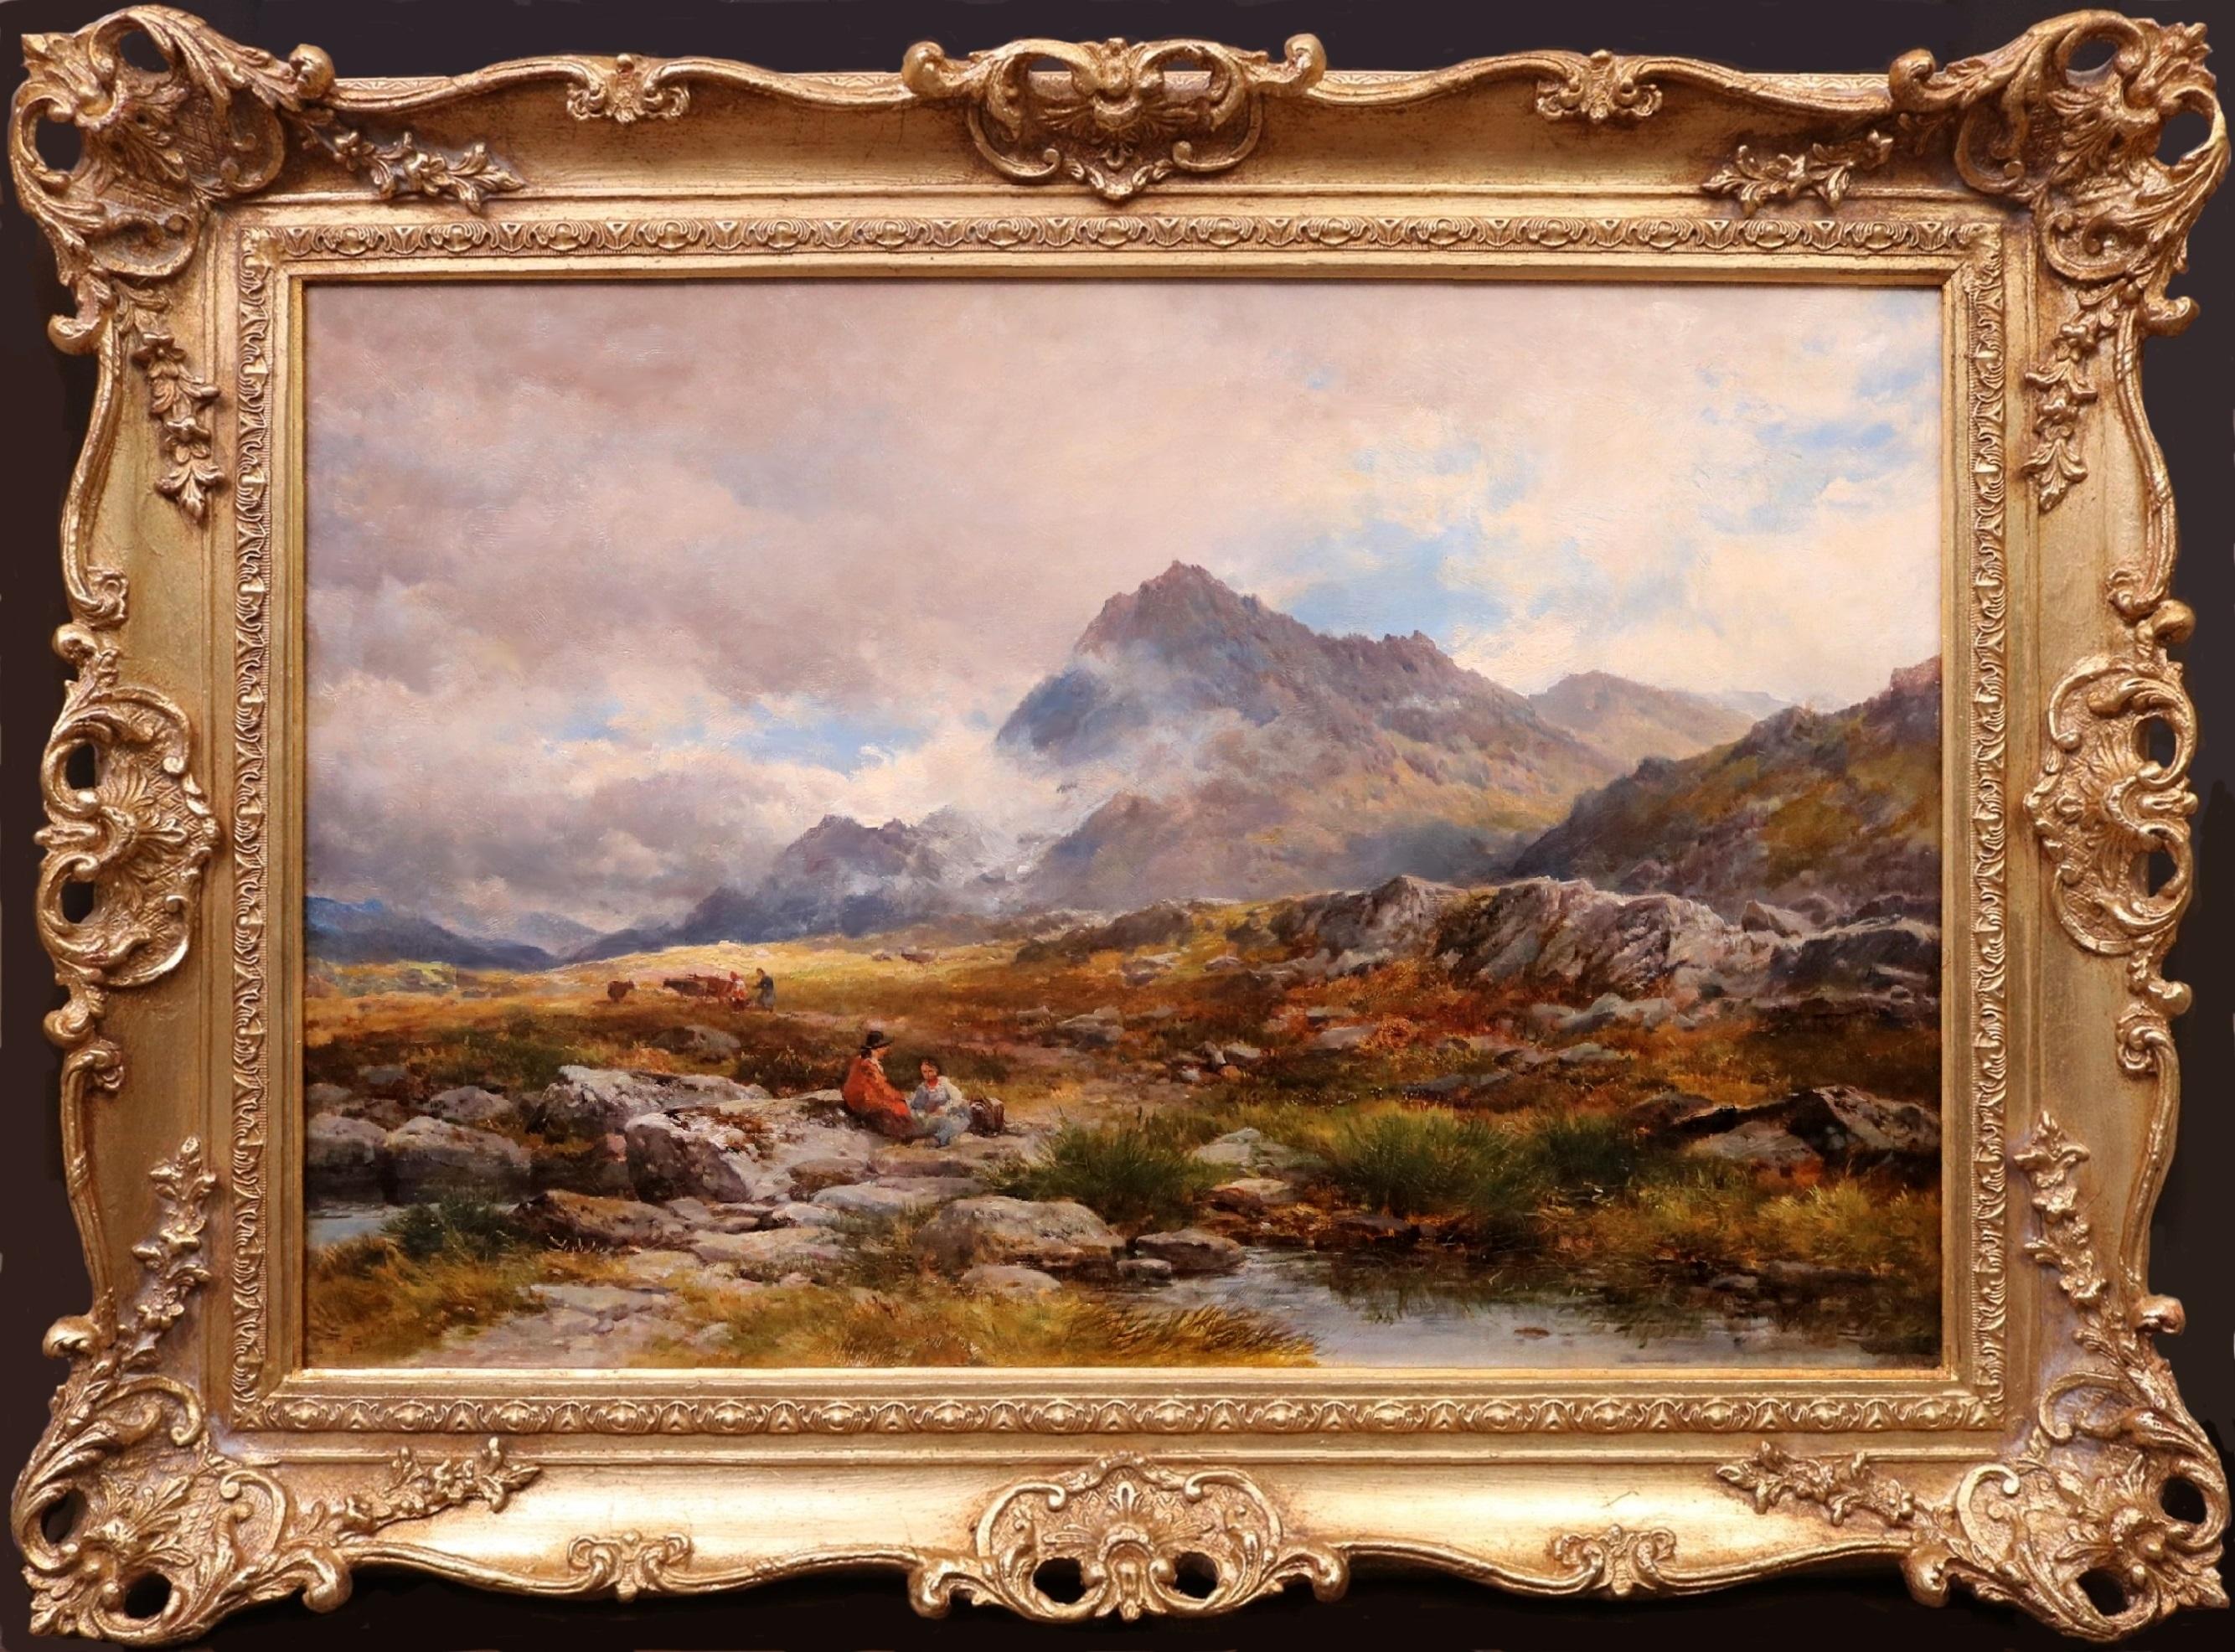 John Syer Figurative Painting - Before Glyder Fawr - Large 19th Century Welsh Mountain Landscape Oil Painting 